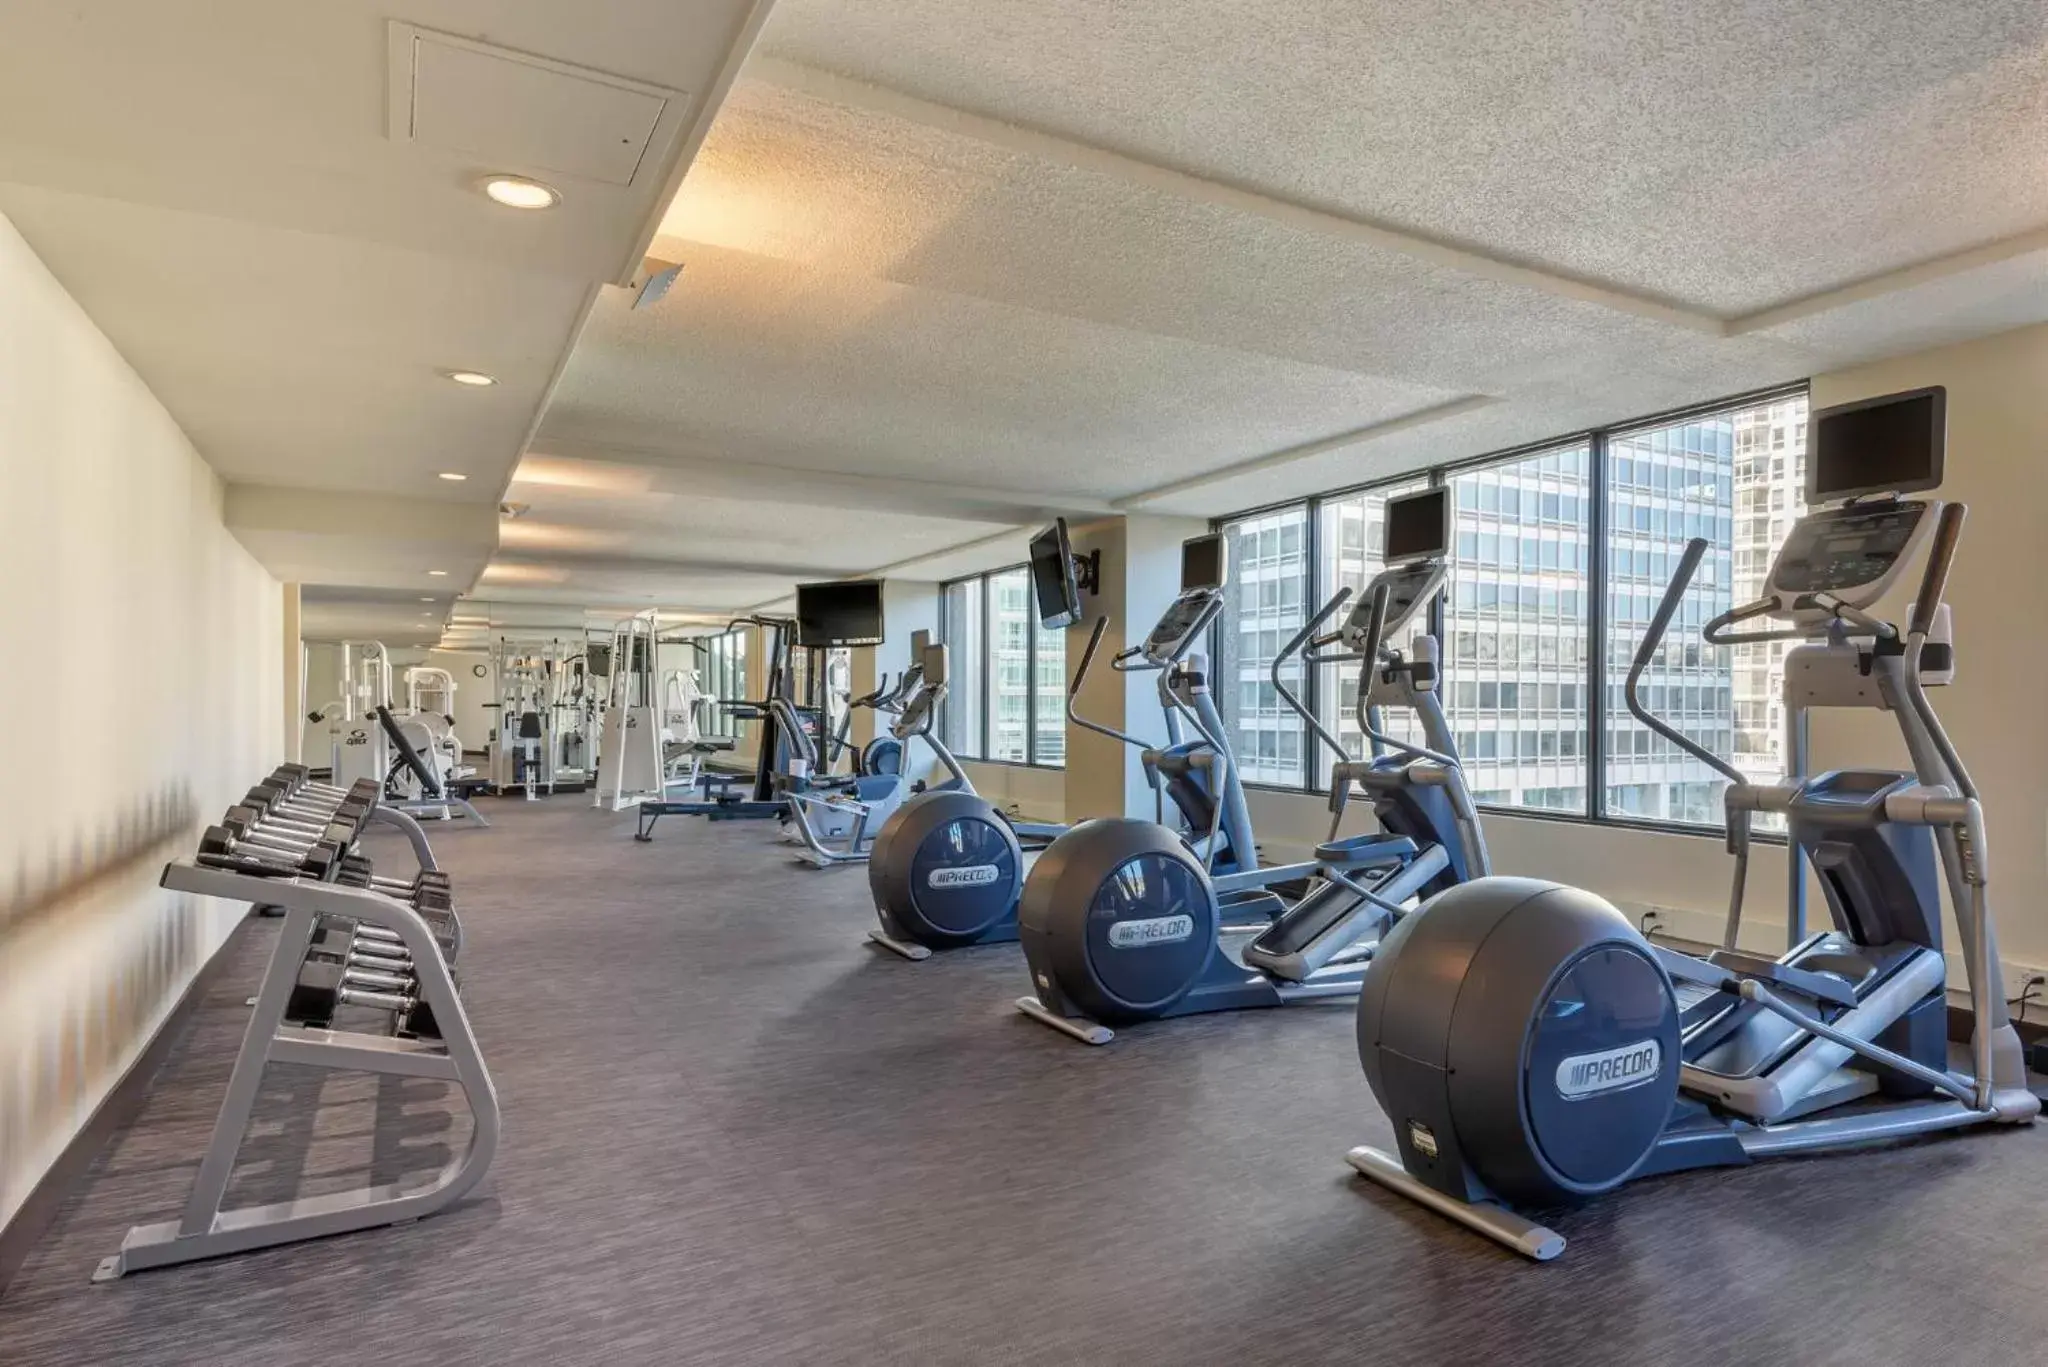 Fitness centre/facilities, Fitness Center/Facilities in Omni Mont-Royal Hotel